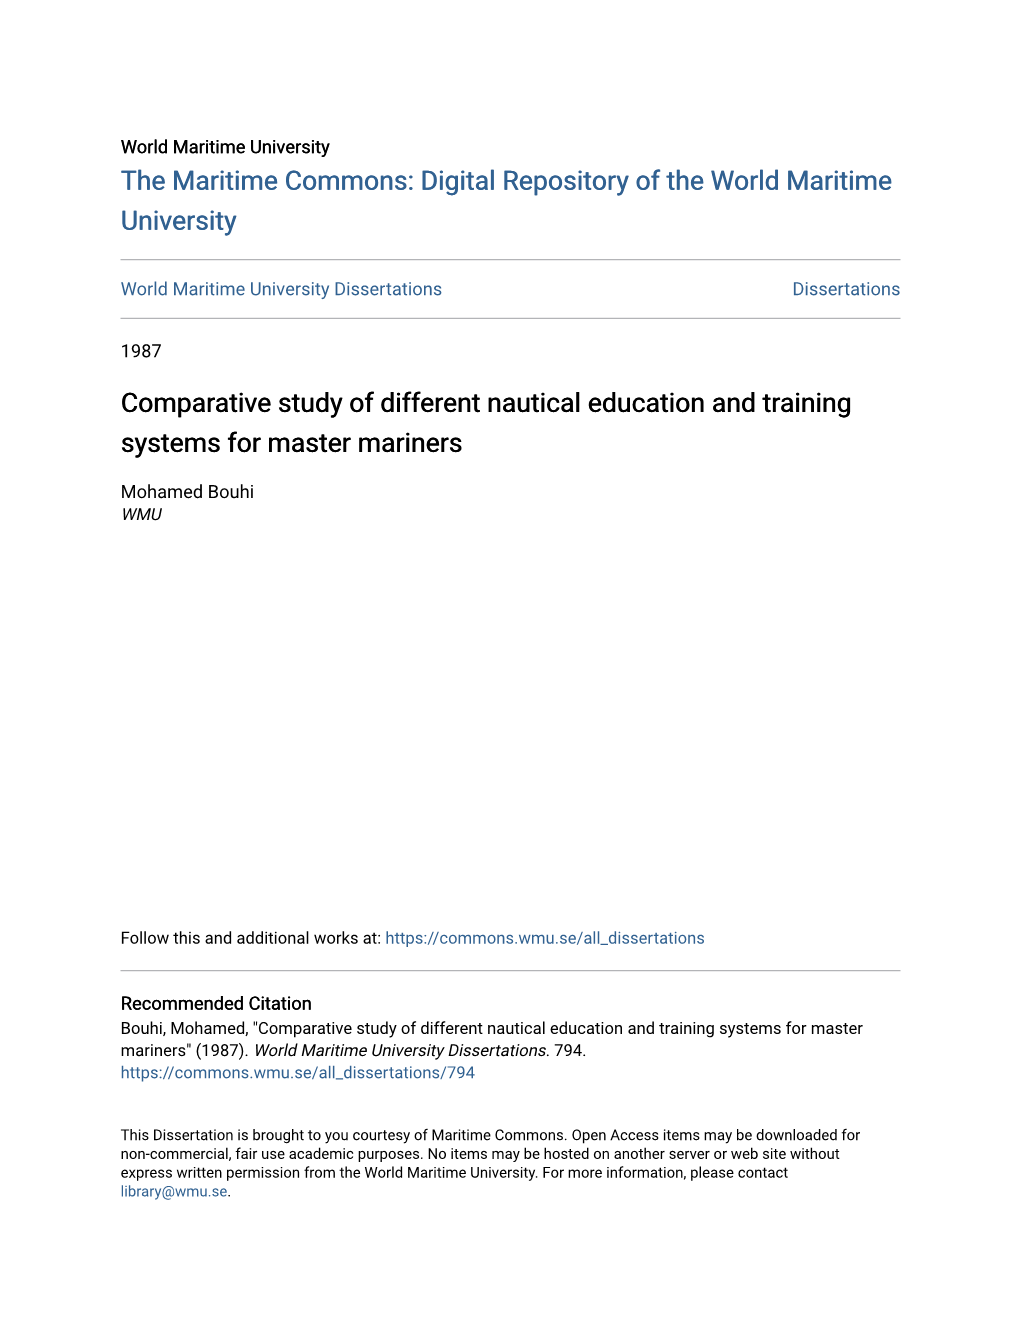 Comparative Study of Different Nautical Education and Training Systems for Master Mariners